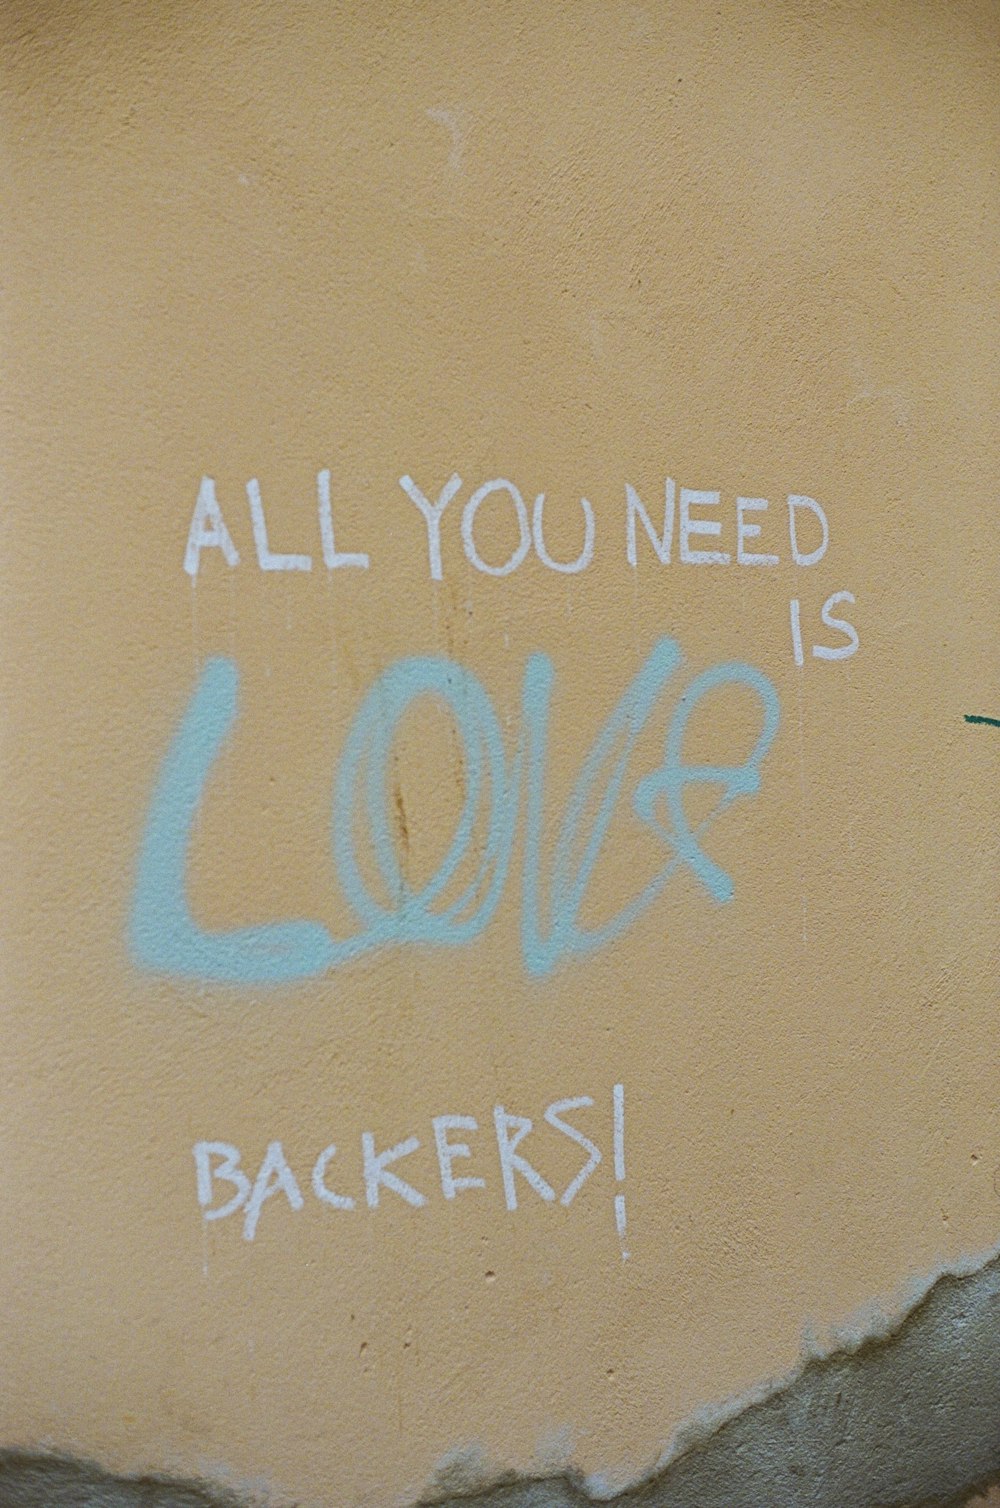 graffiti on the side of a building that says all you need is love and backpack